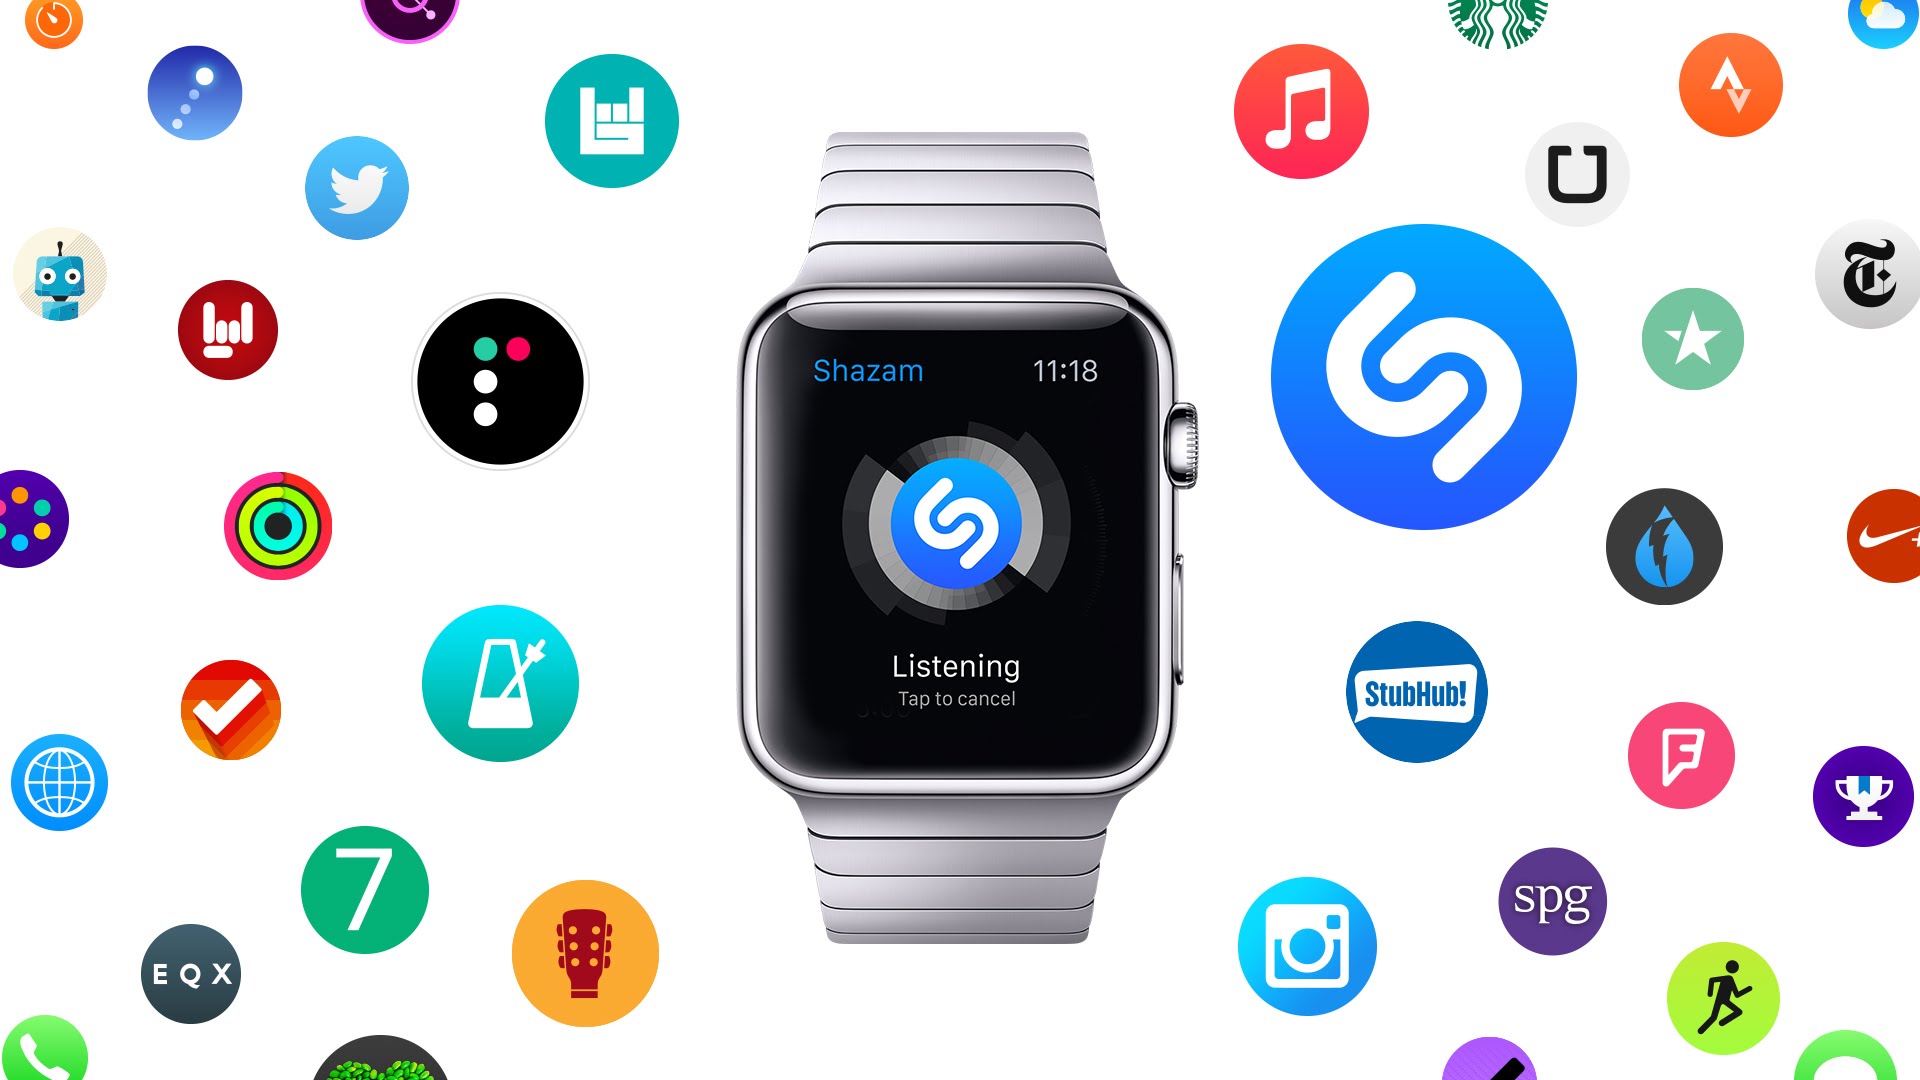 Apple Posts Three New Apple Watch Ads Focusing on Fitness, Travel and Music Apps